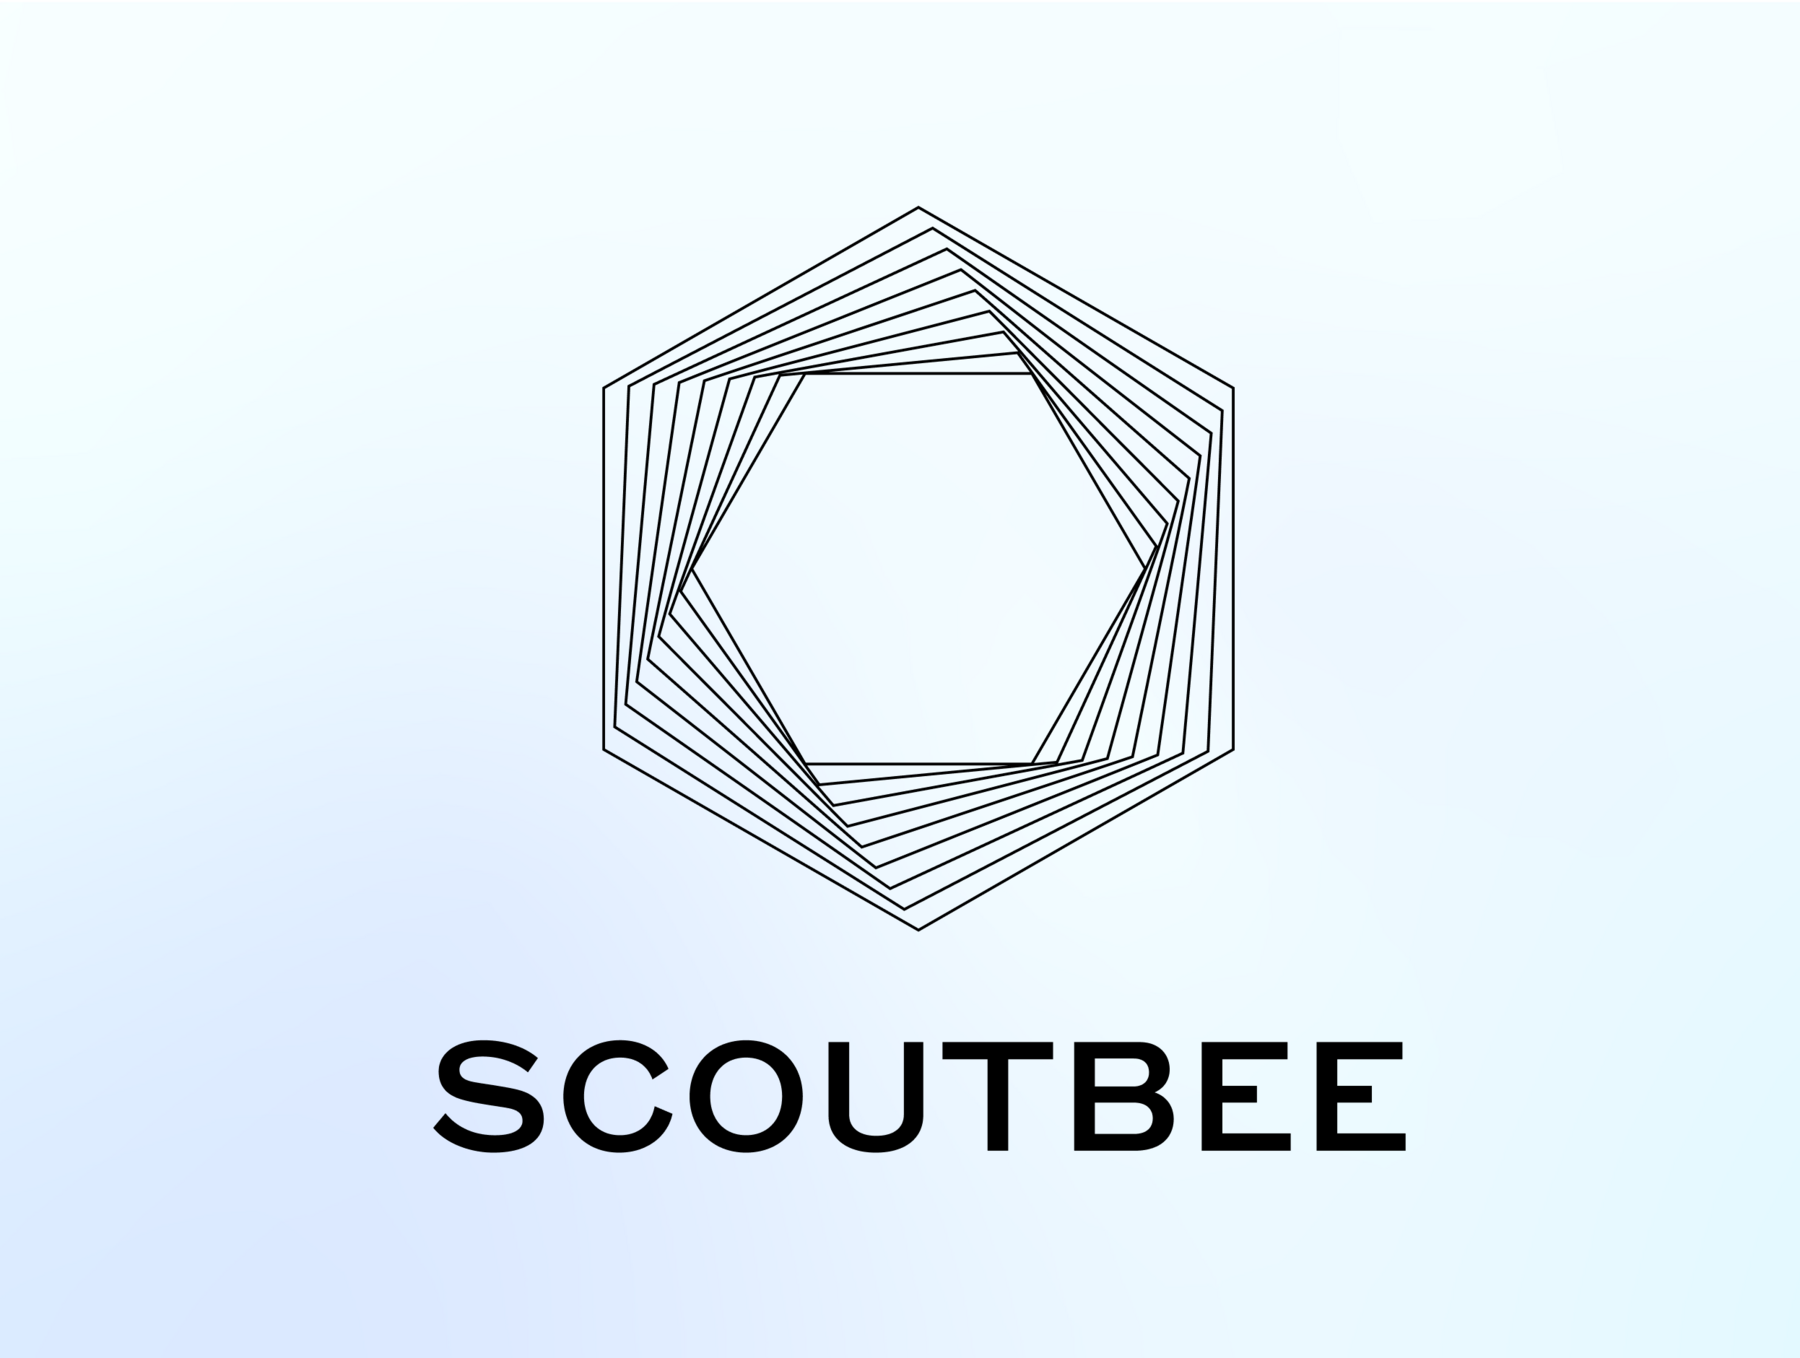 Scoutbee: innovation consulting companies